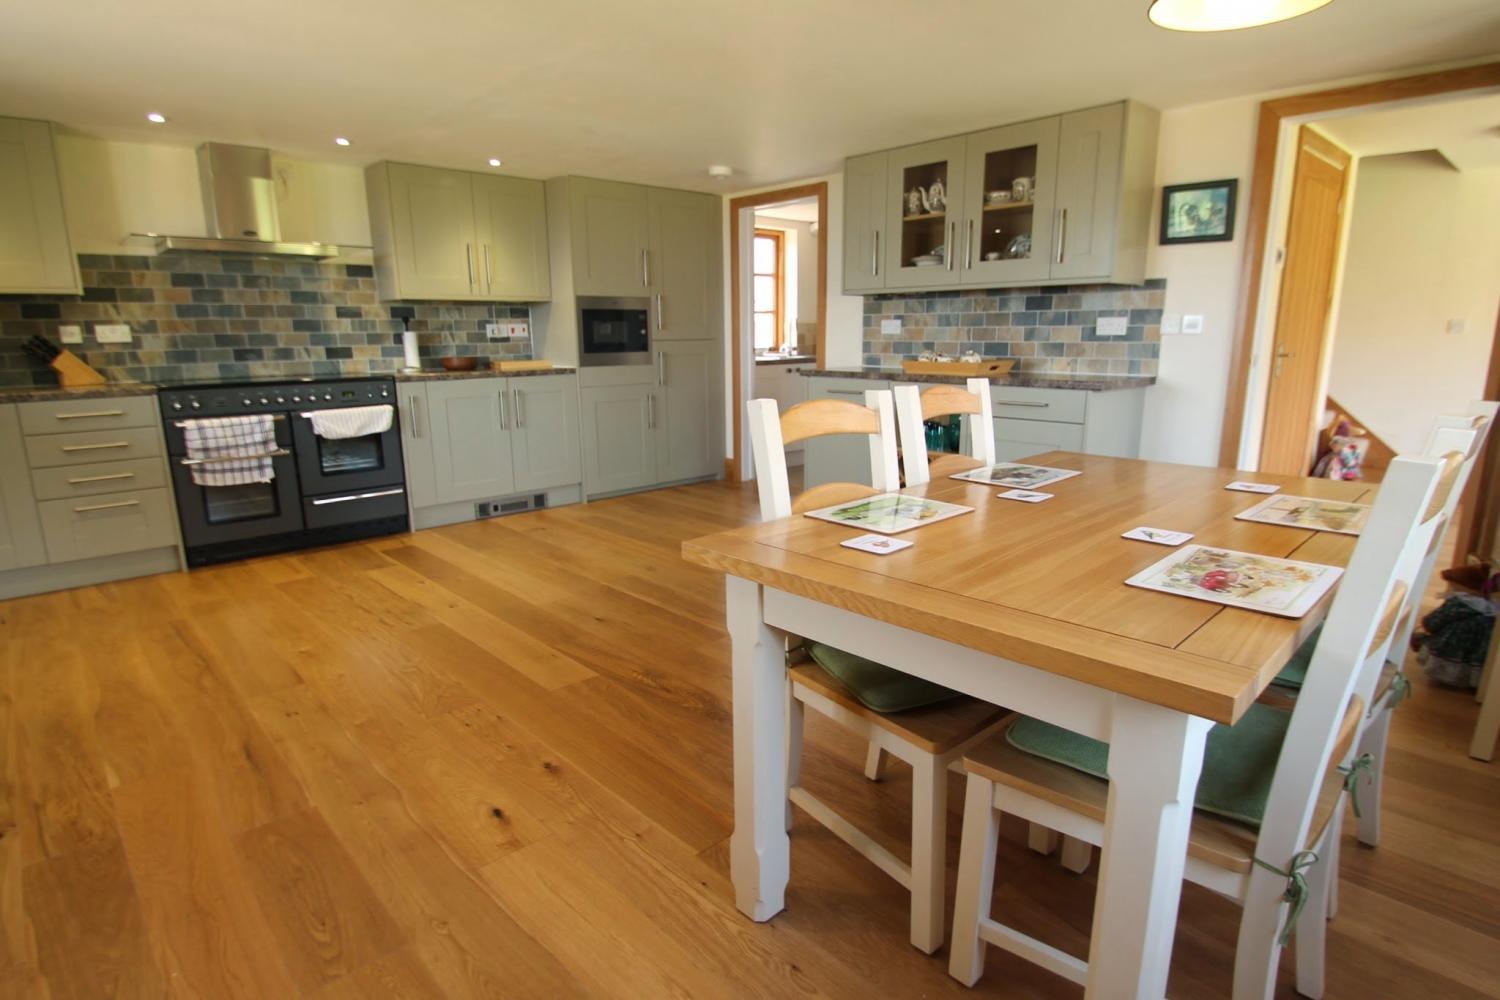 Spacious kitchen with large dining table